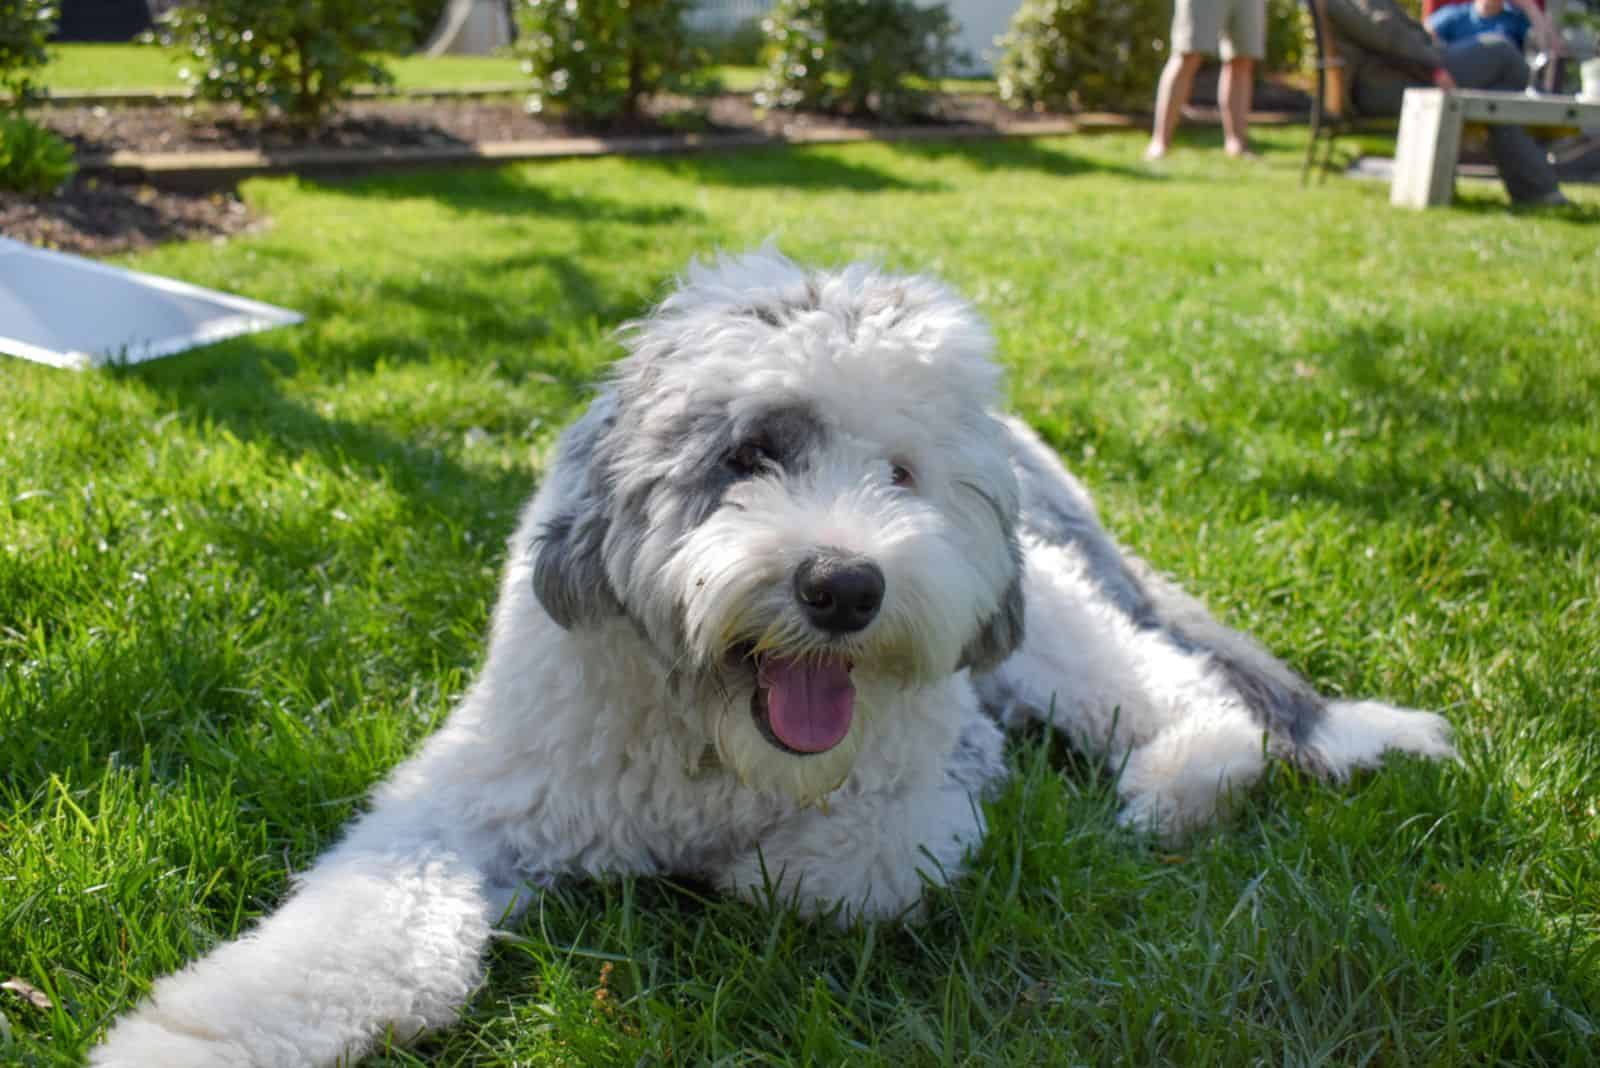 7 Best Dog Food For Sheepadoodle: The Nutrition Your Dog Needs